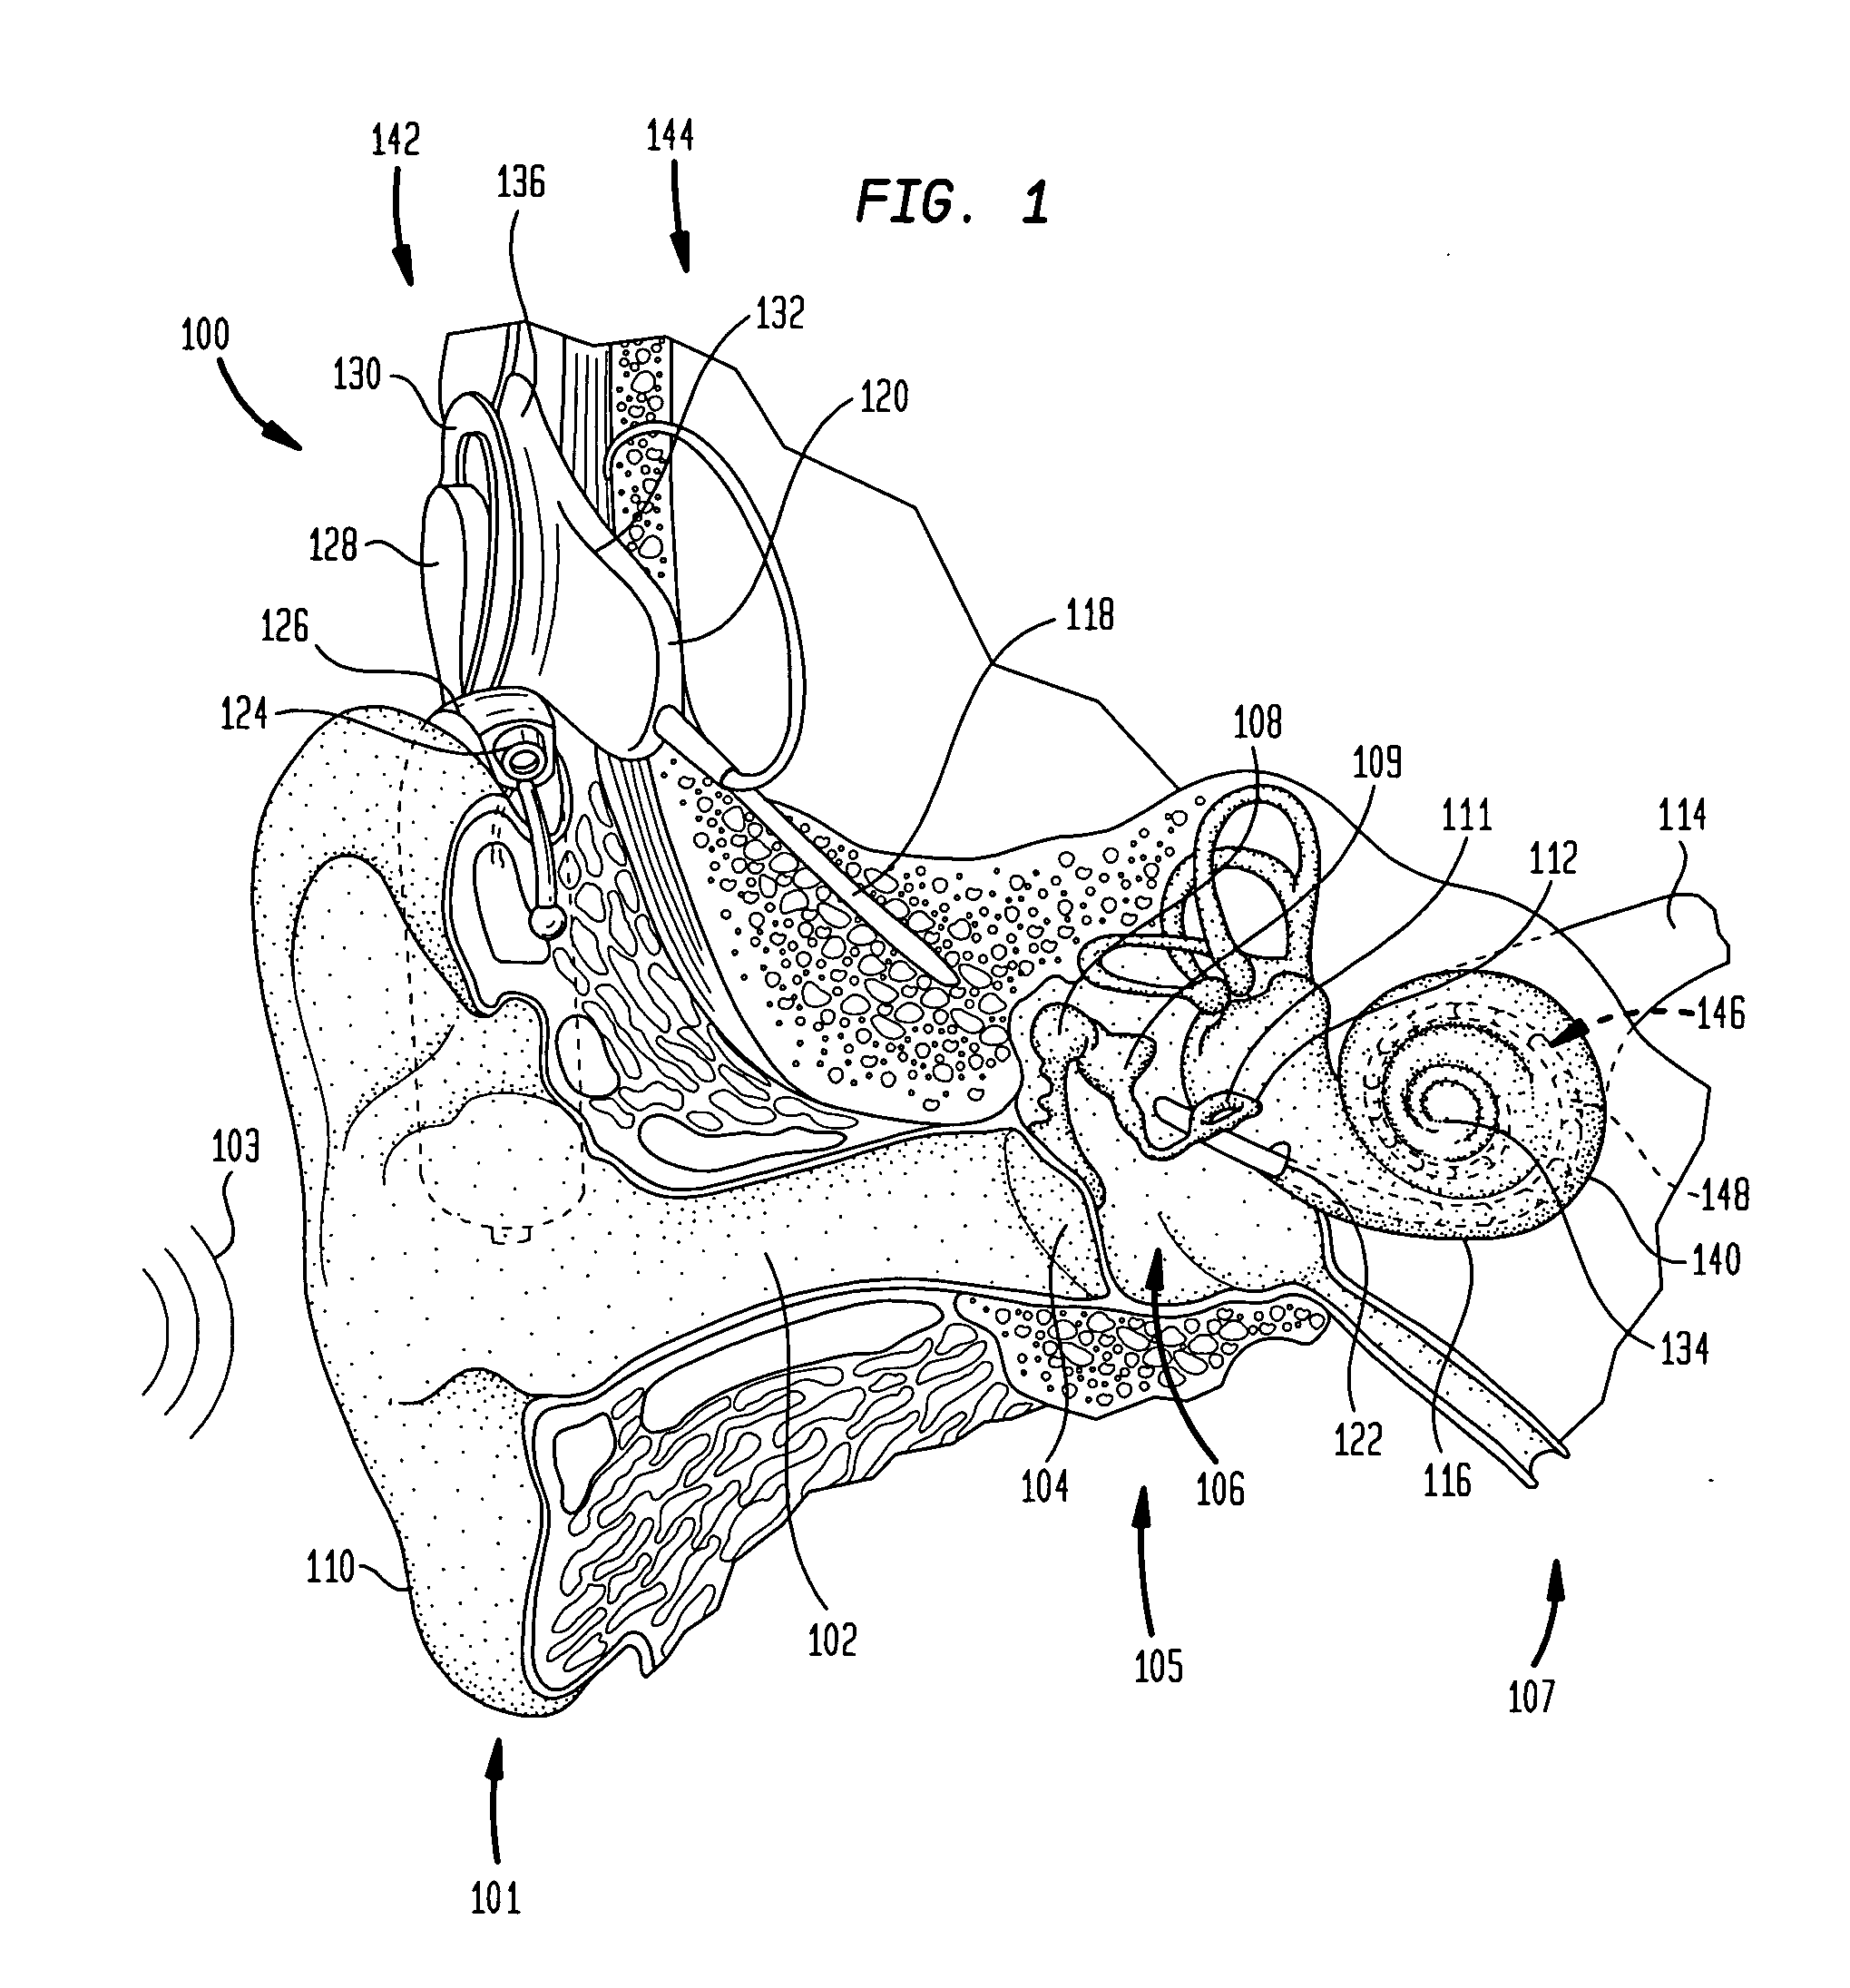 Electrode assembly for a stimulating medical device